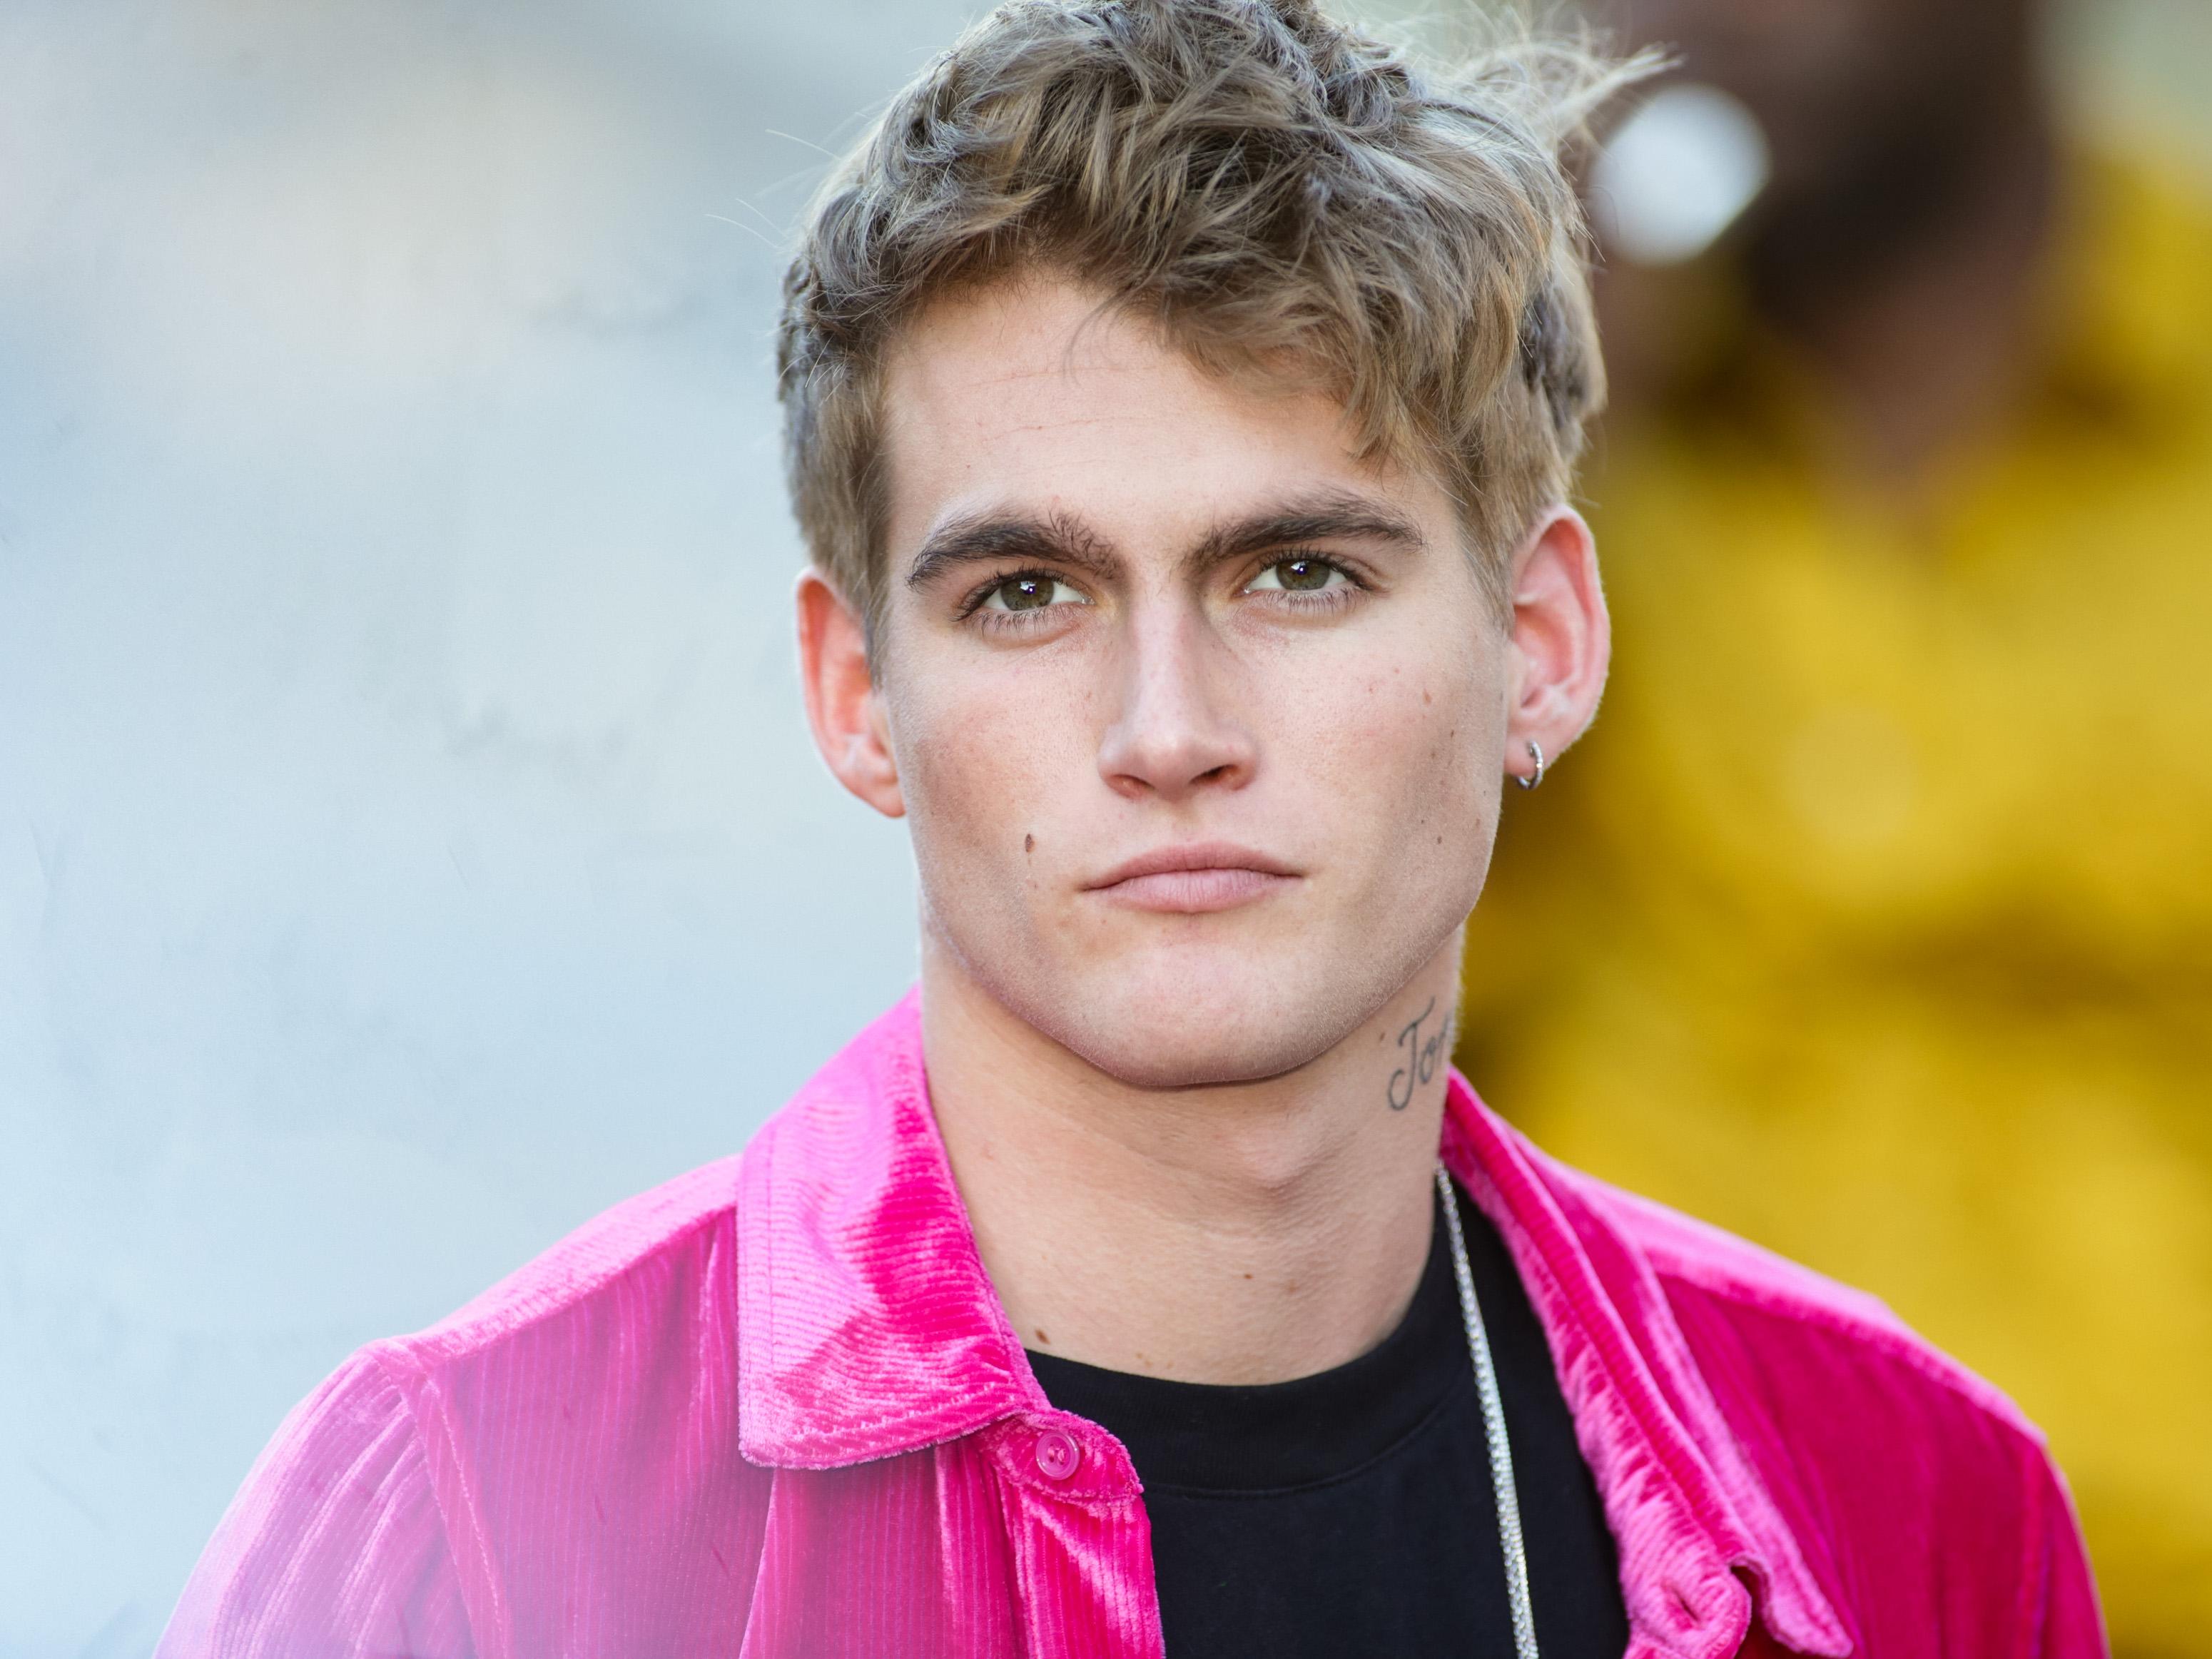 Cindy Crawford’s Son Presley Gerber Goes On Instagram Live to Defend Face Tattoo